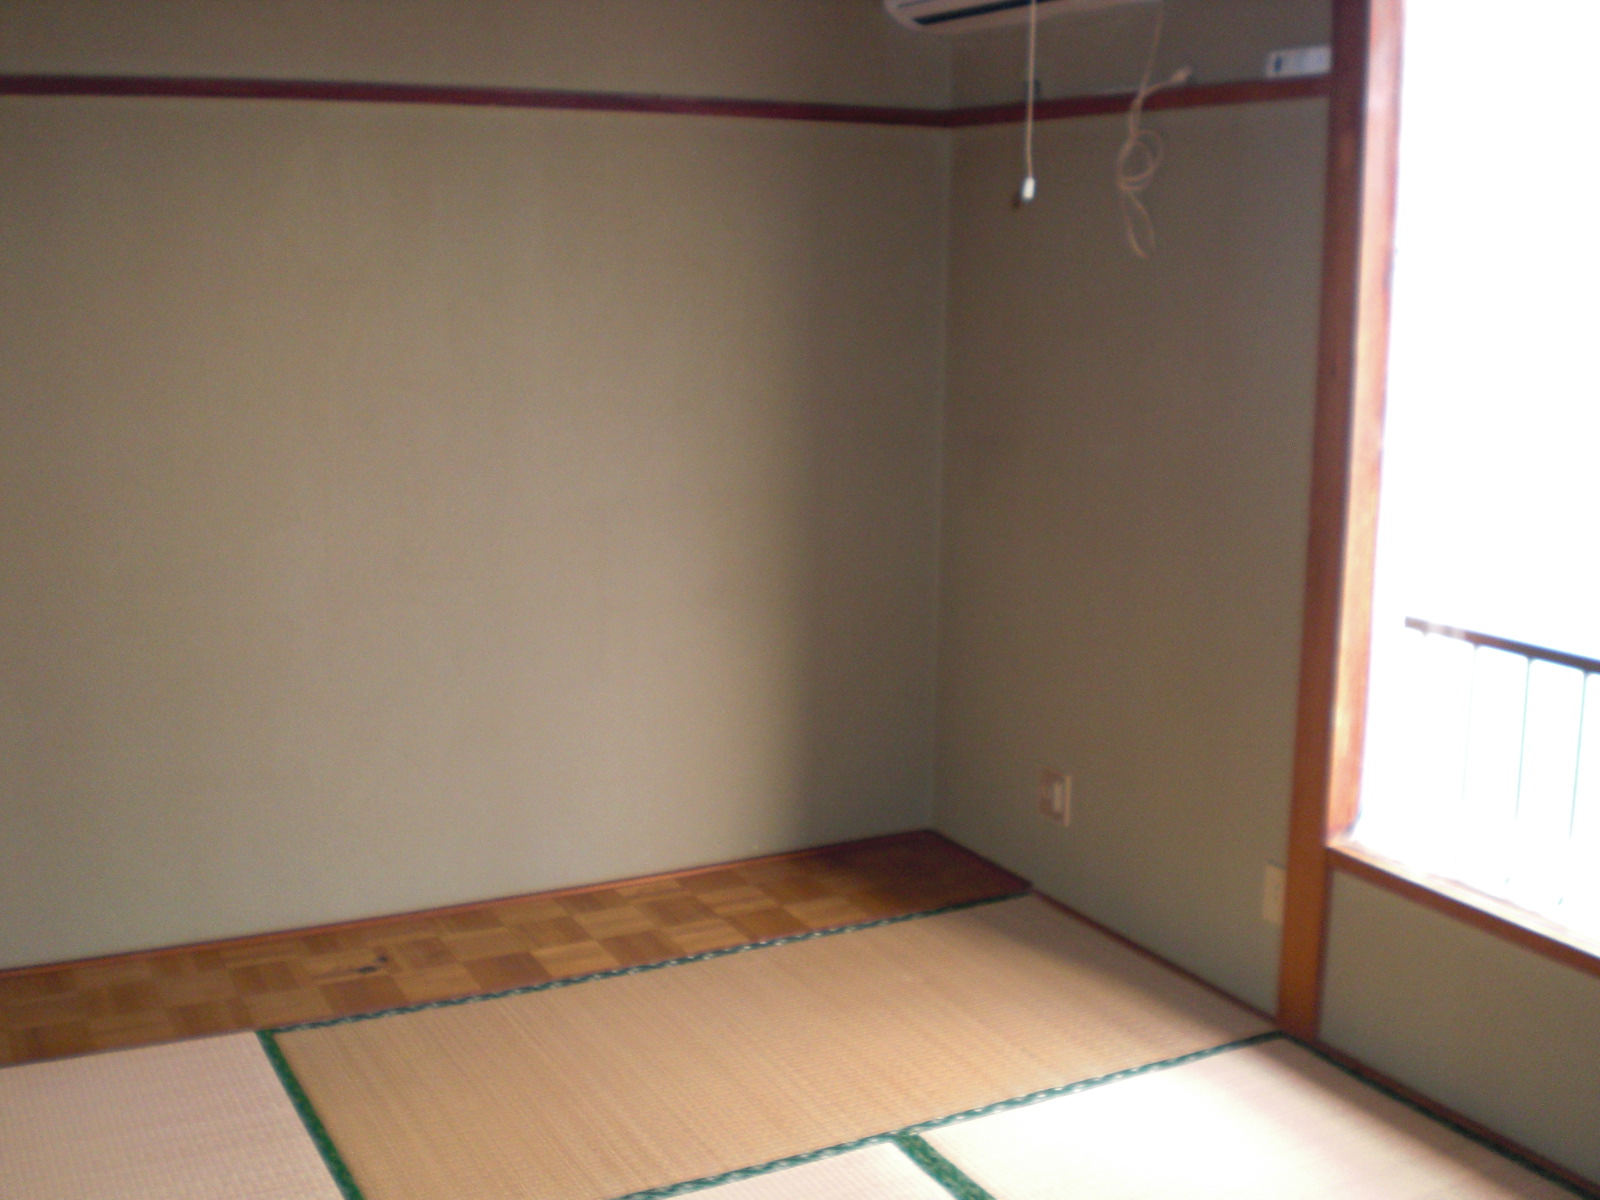 Living and room. Since there are also plates tatami 6 Pledge